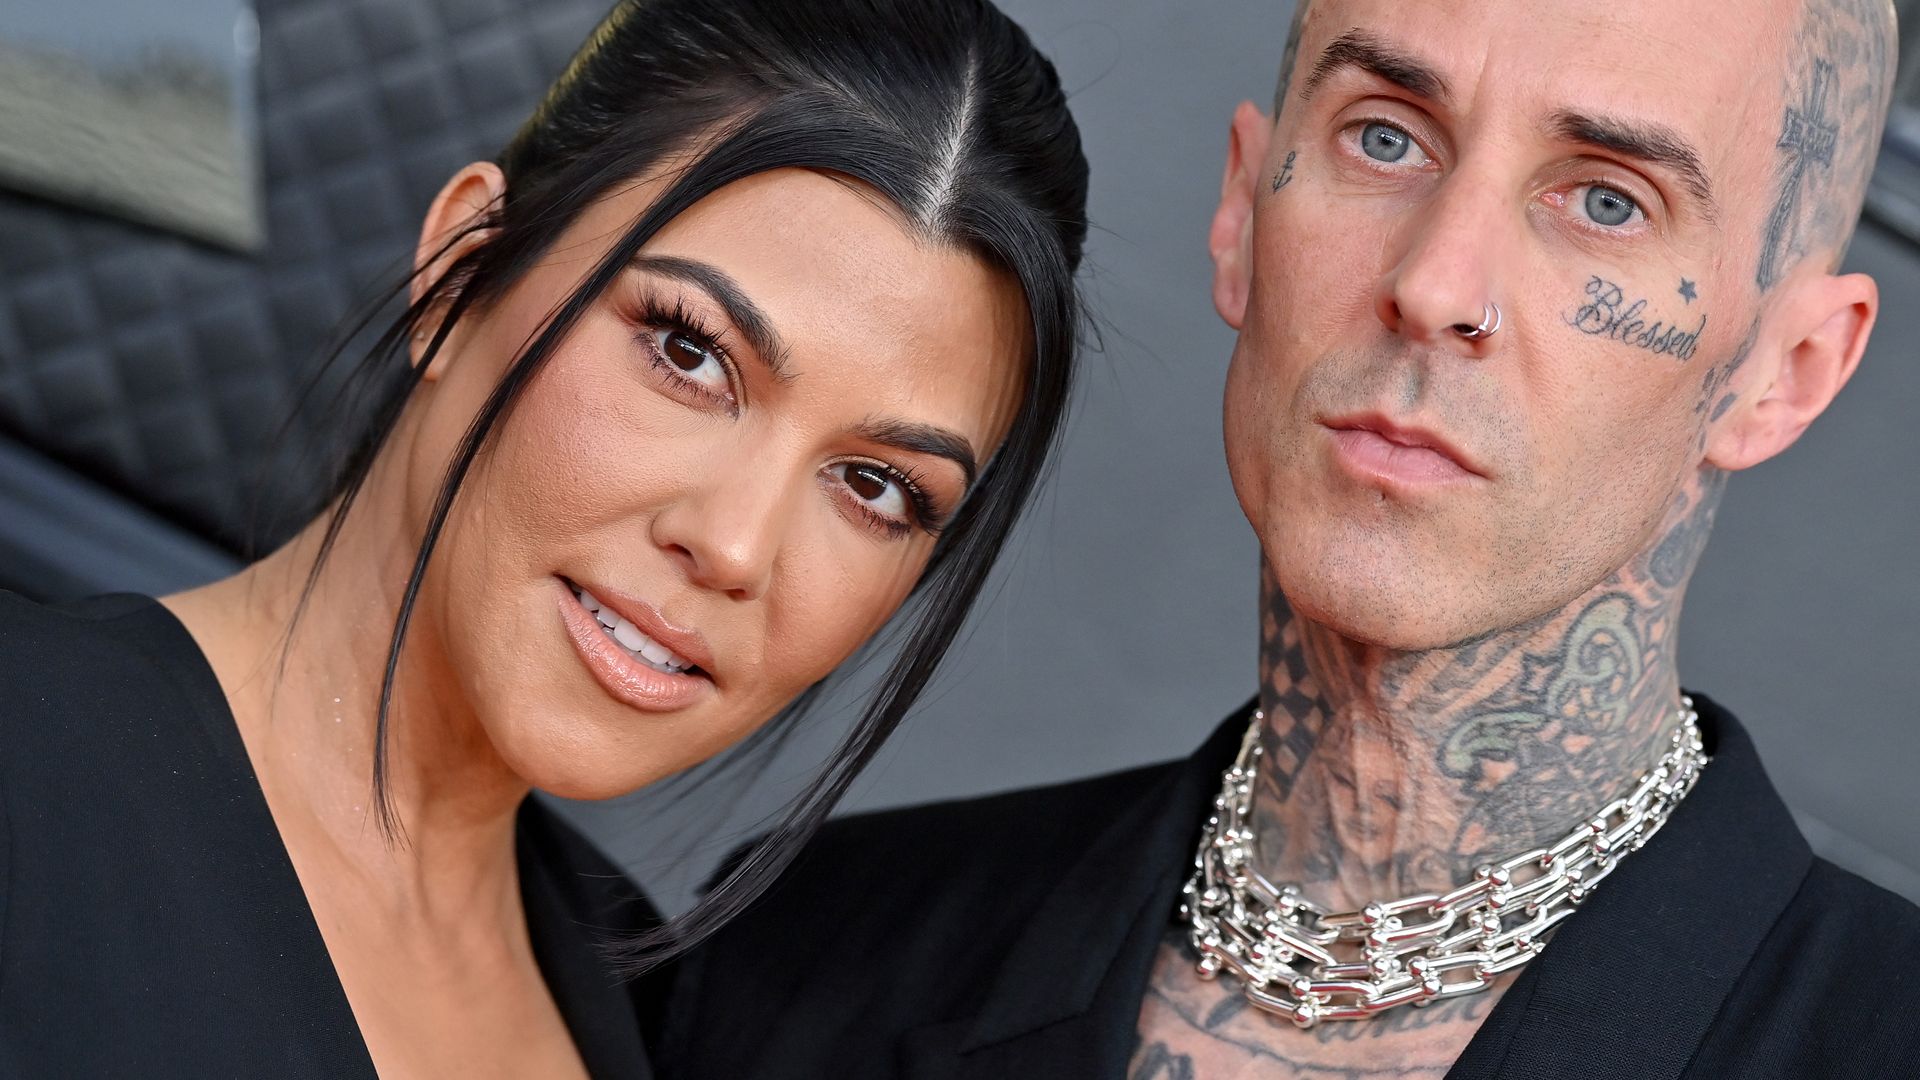 Kourtney Kardashian and Travis Barker's son Rocky is growing up fast - see new family photos